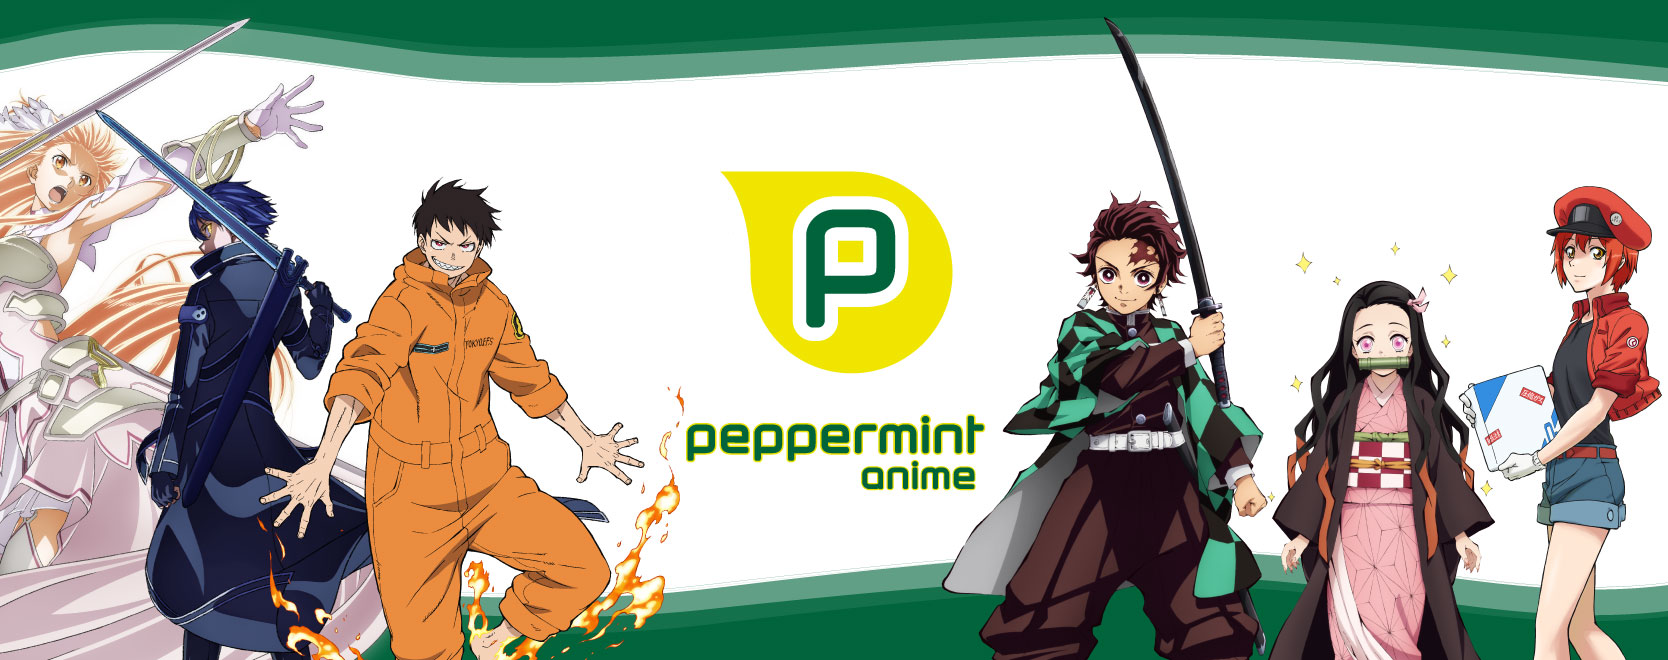 peppermint anime - Komplette Episoden in Ger Dub – Anime2You